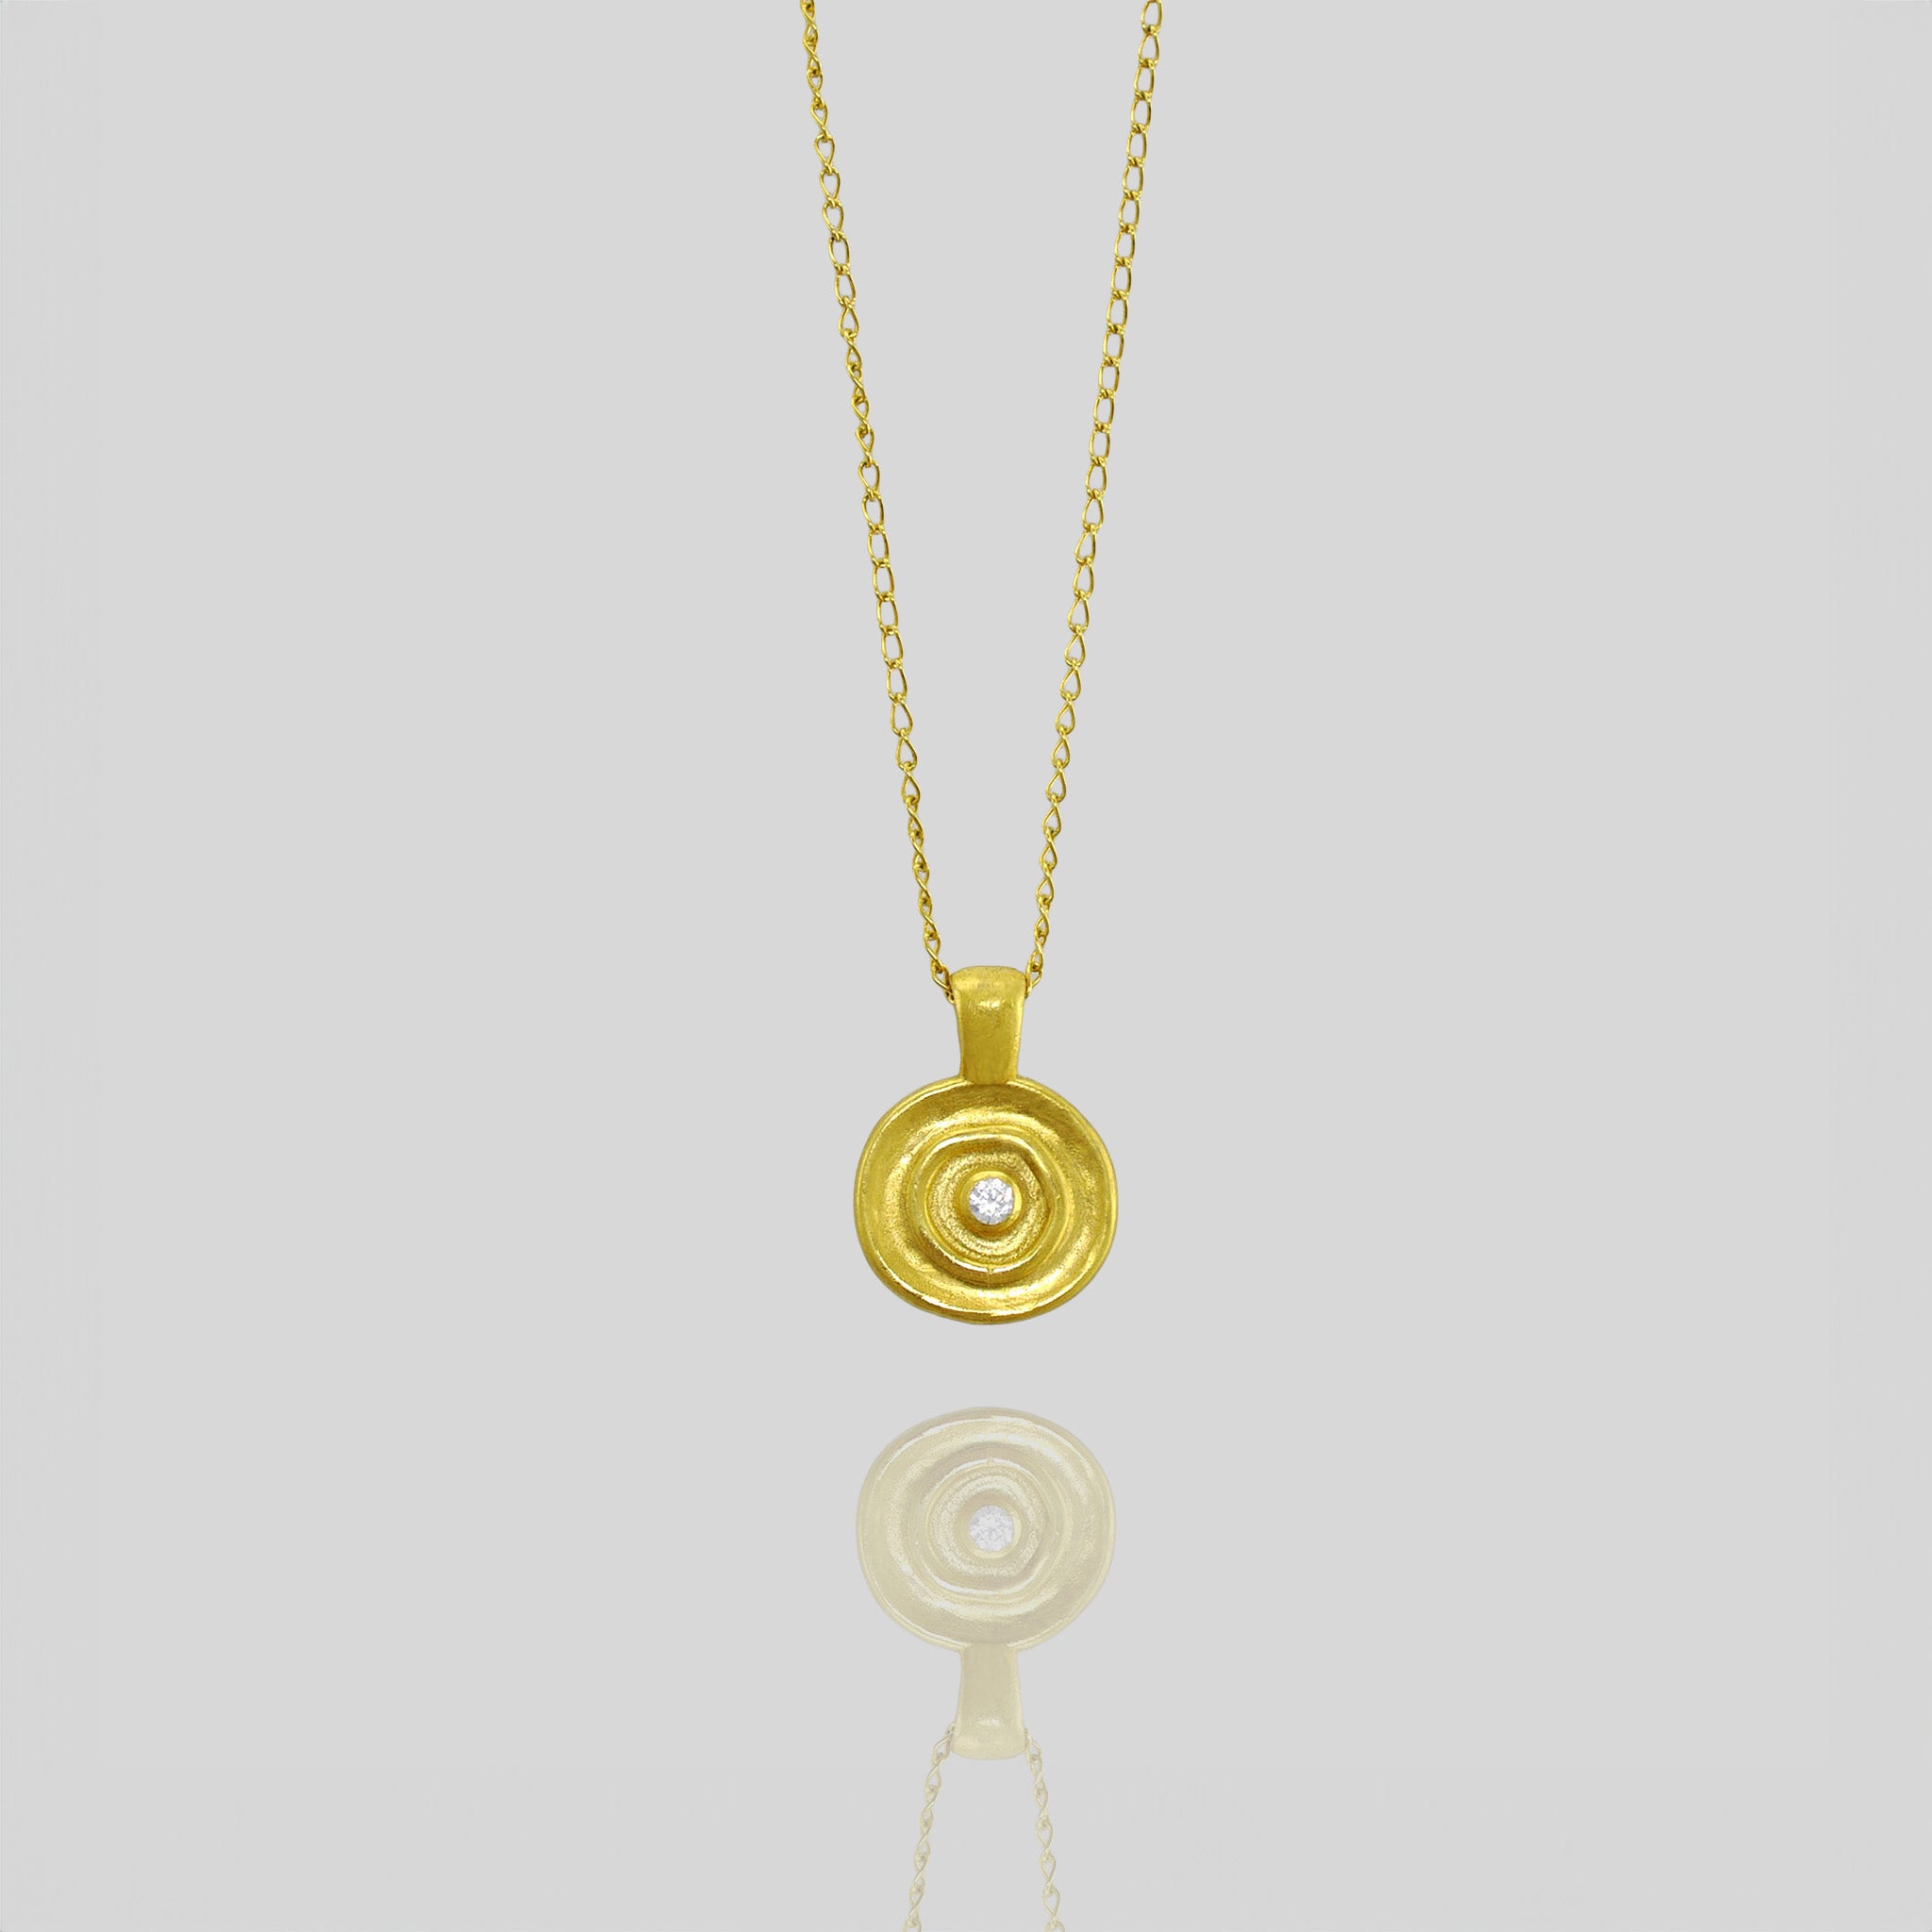 Handcrafted round pendant in yellow gold, featuring a central diamond inspired by ancient Egyptian Pharaohs' jewelry.